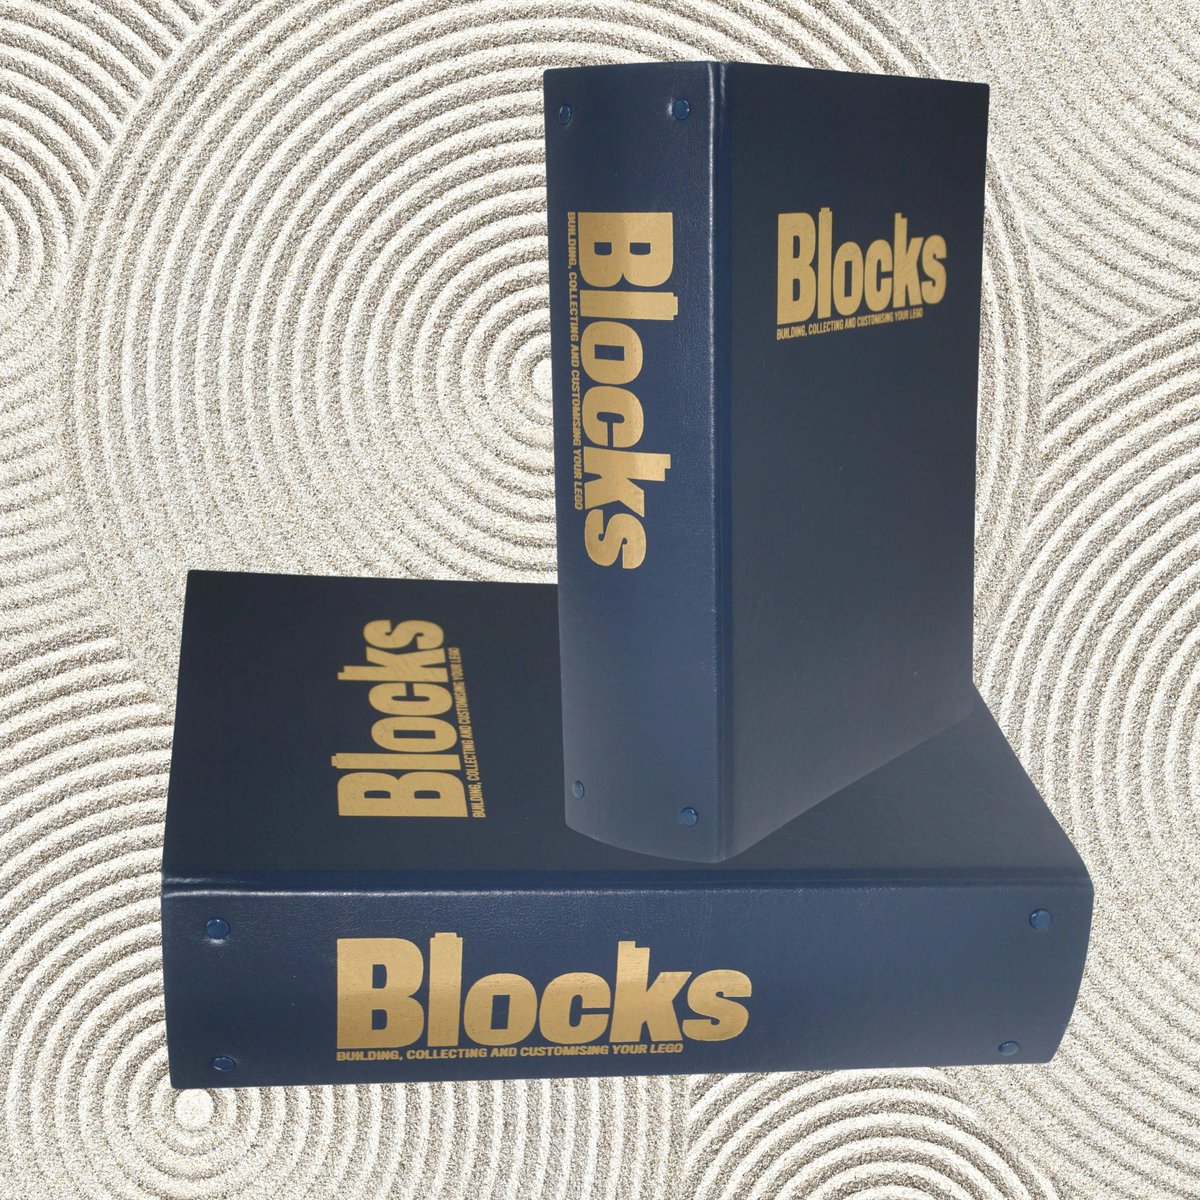 Storing up to 12 issues of #BlocksMagazine is made easy with a visit to BlocksMag.com/shop. If you're staring at your subscription sitting on the floor, our binders are the perfect solution for you. They're hard-backed, so your issues will be protected. #LEGOFan #AFOL